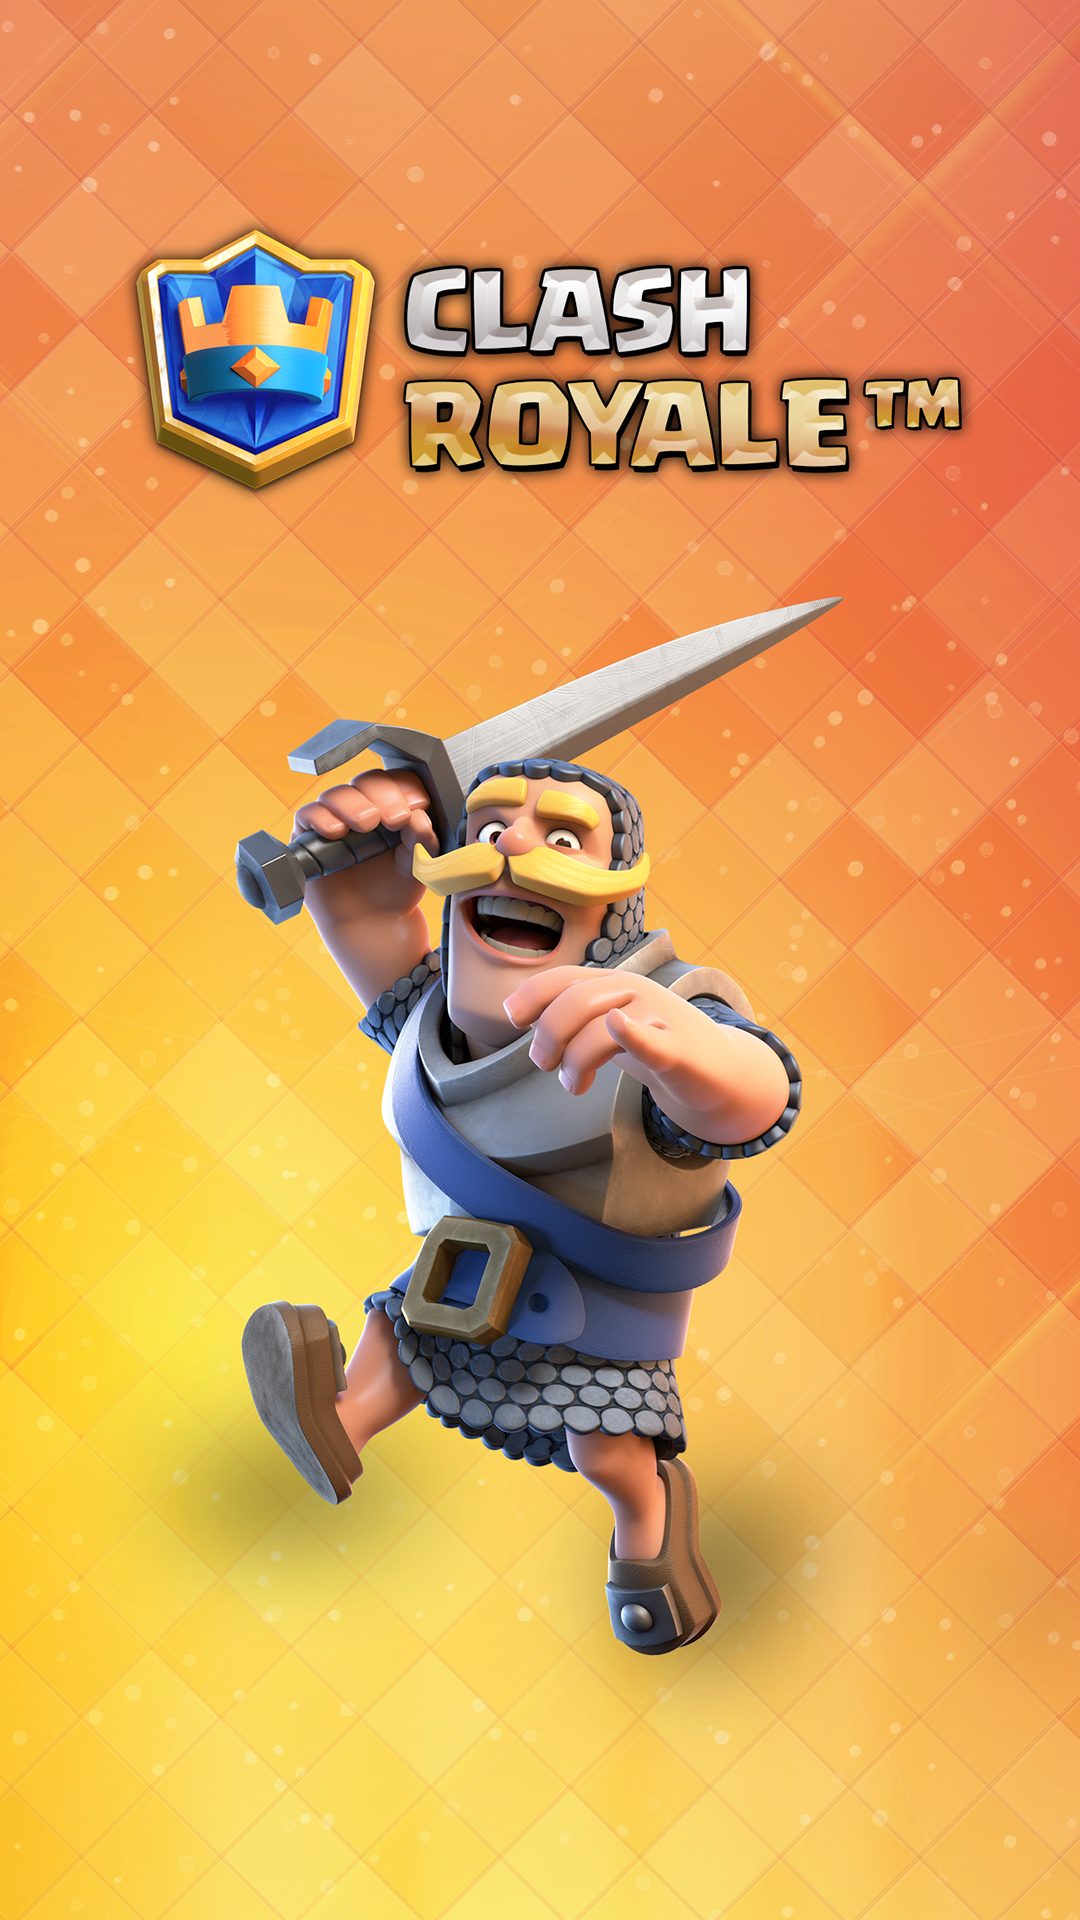 Wallpapers for Clash Royale™ APK 1.0.0 for Android – Download Wallpapers  for Clash Royale™ APK Latest Version from APKFab.com